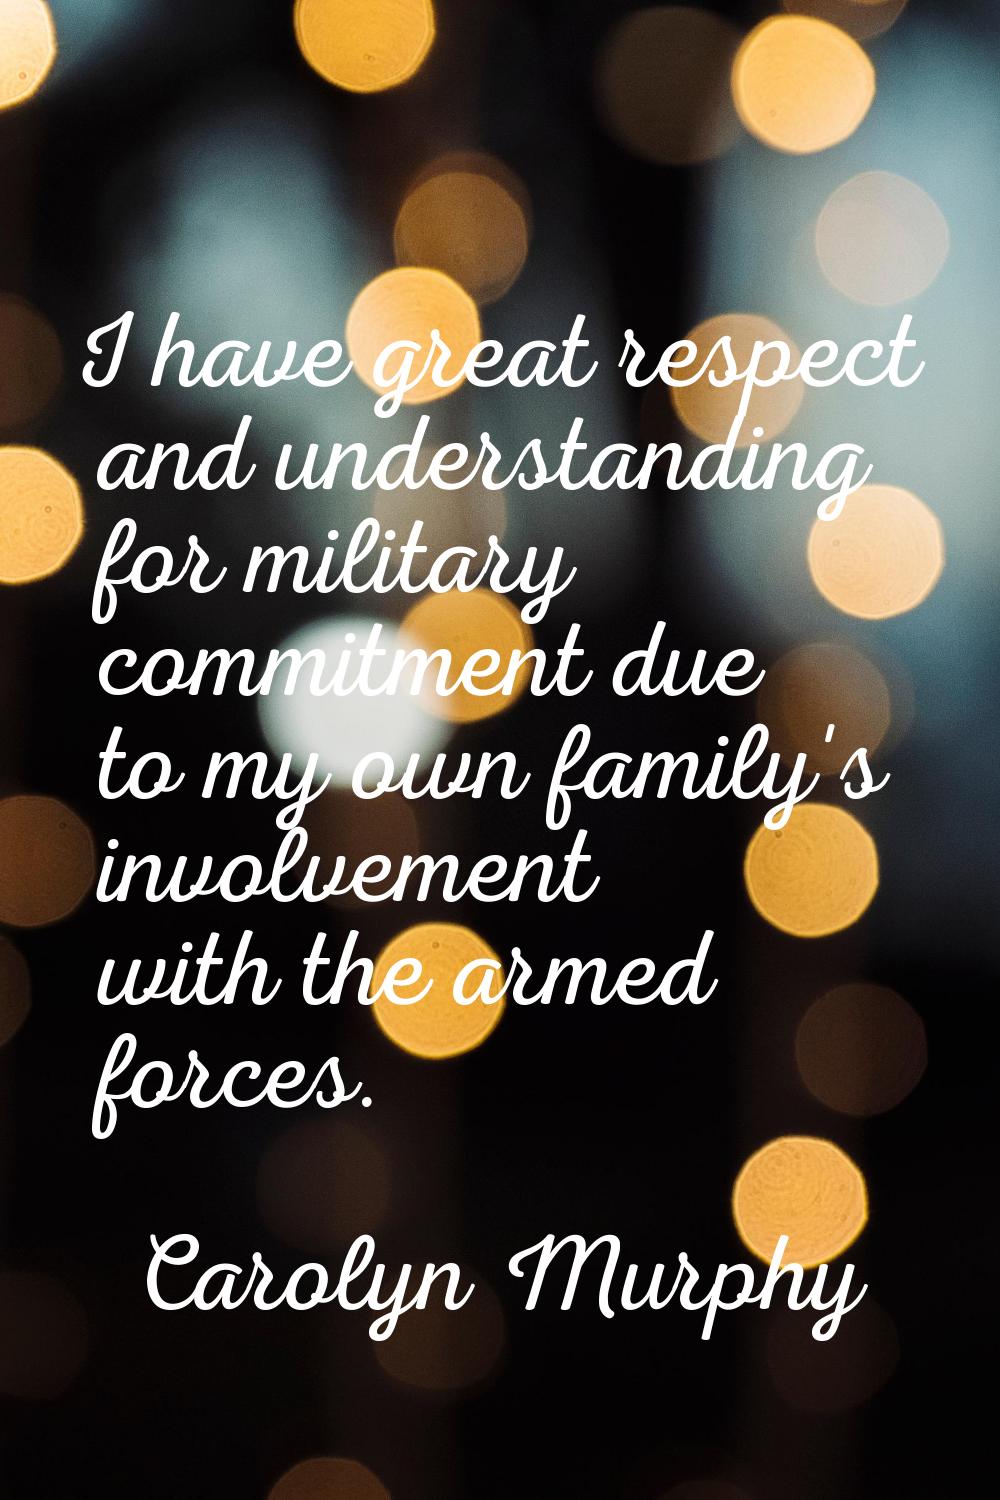 I have great respect and understanding for military commitment due to my own family's involvement w